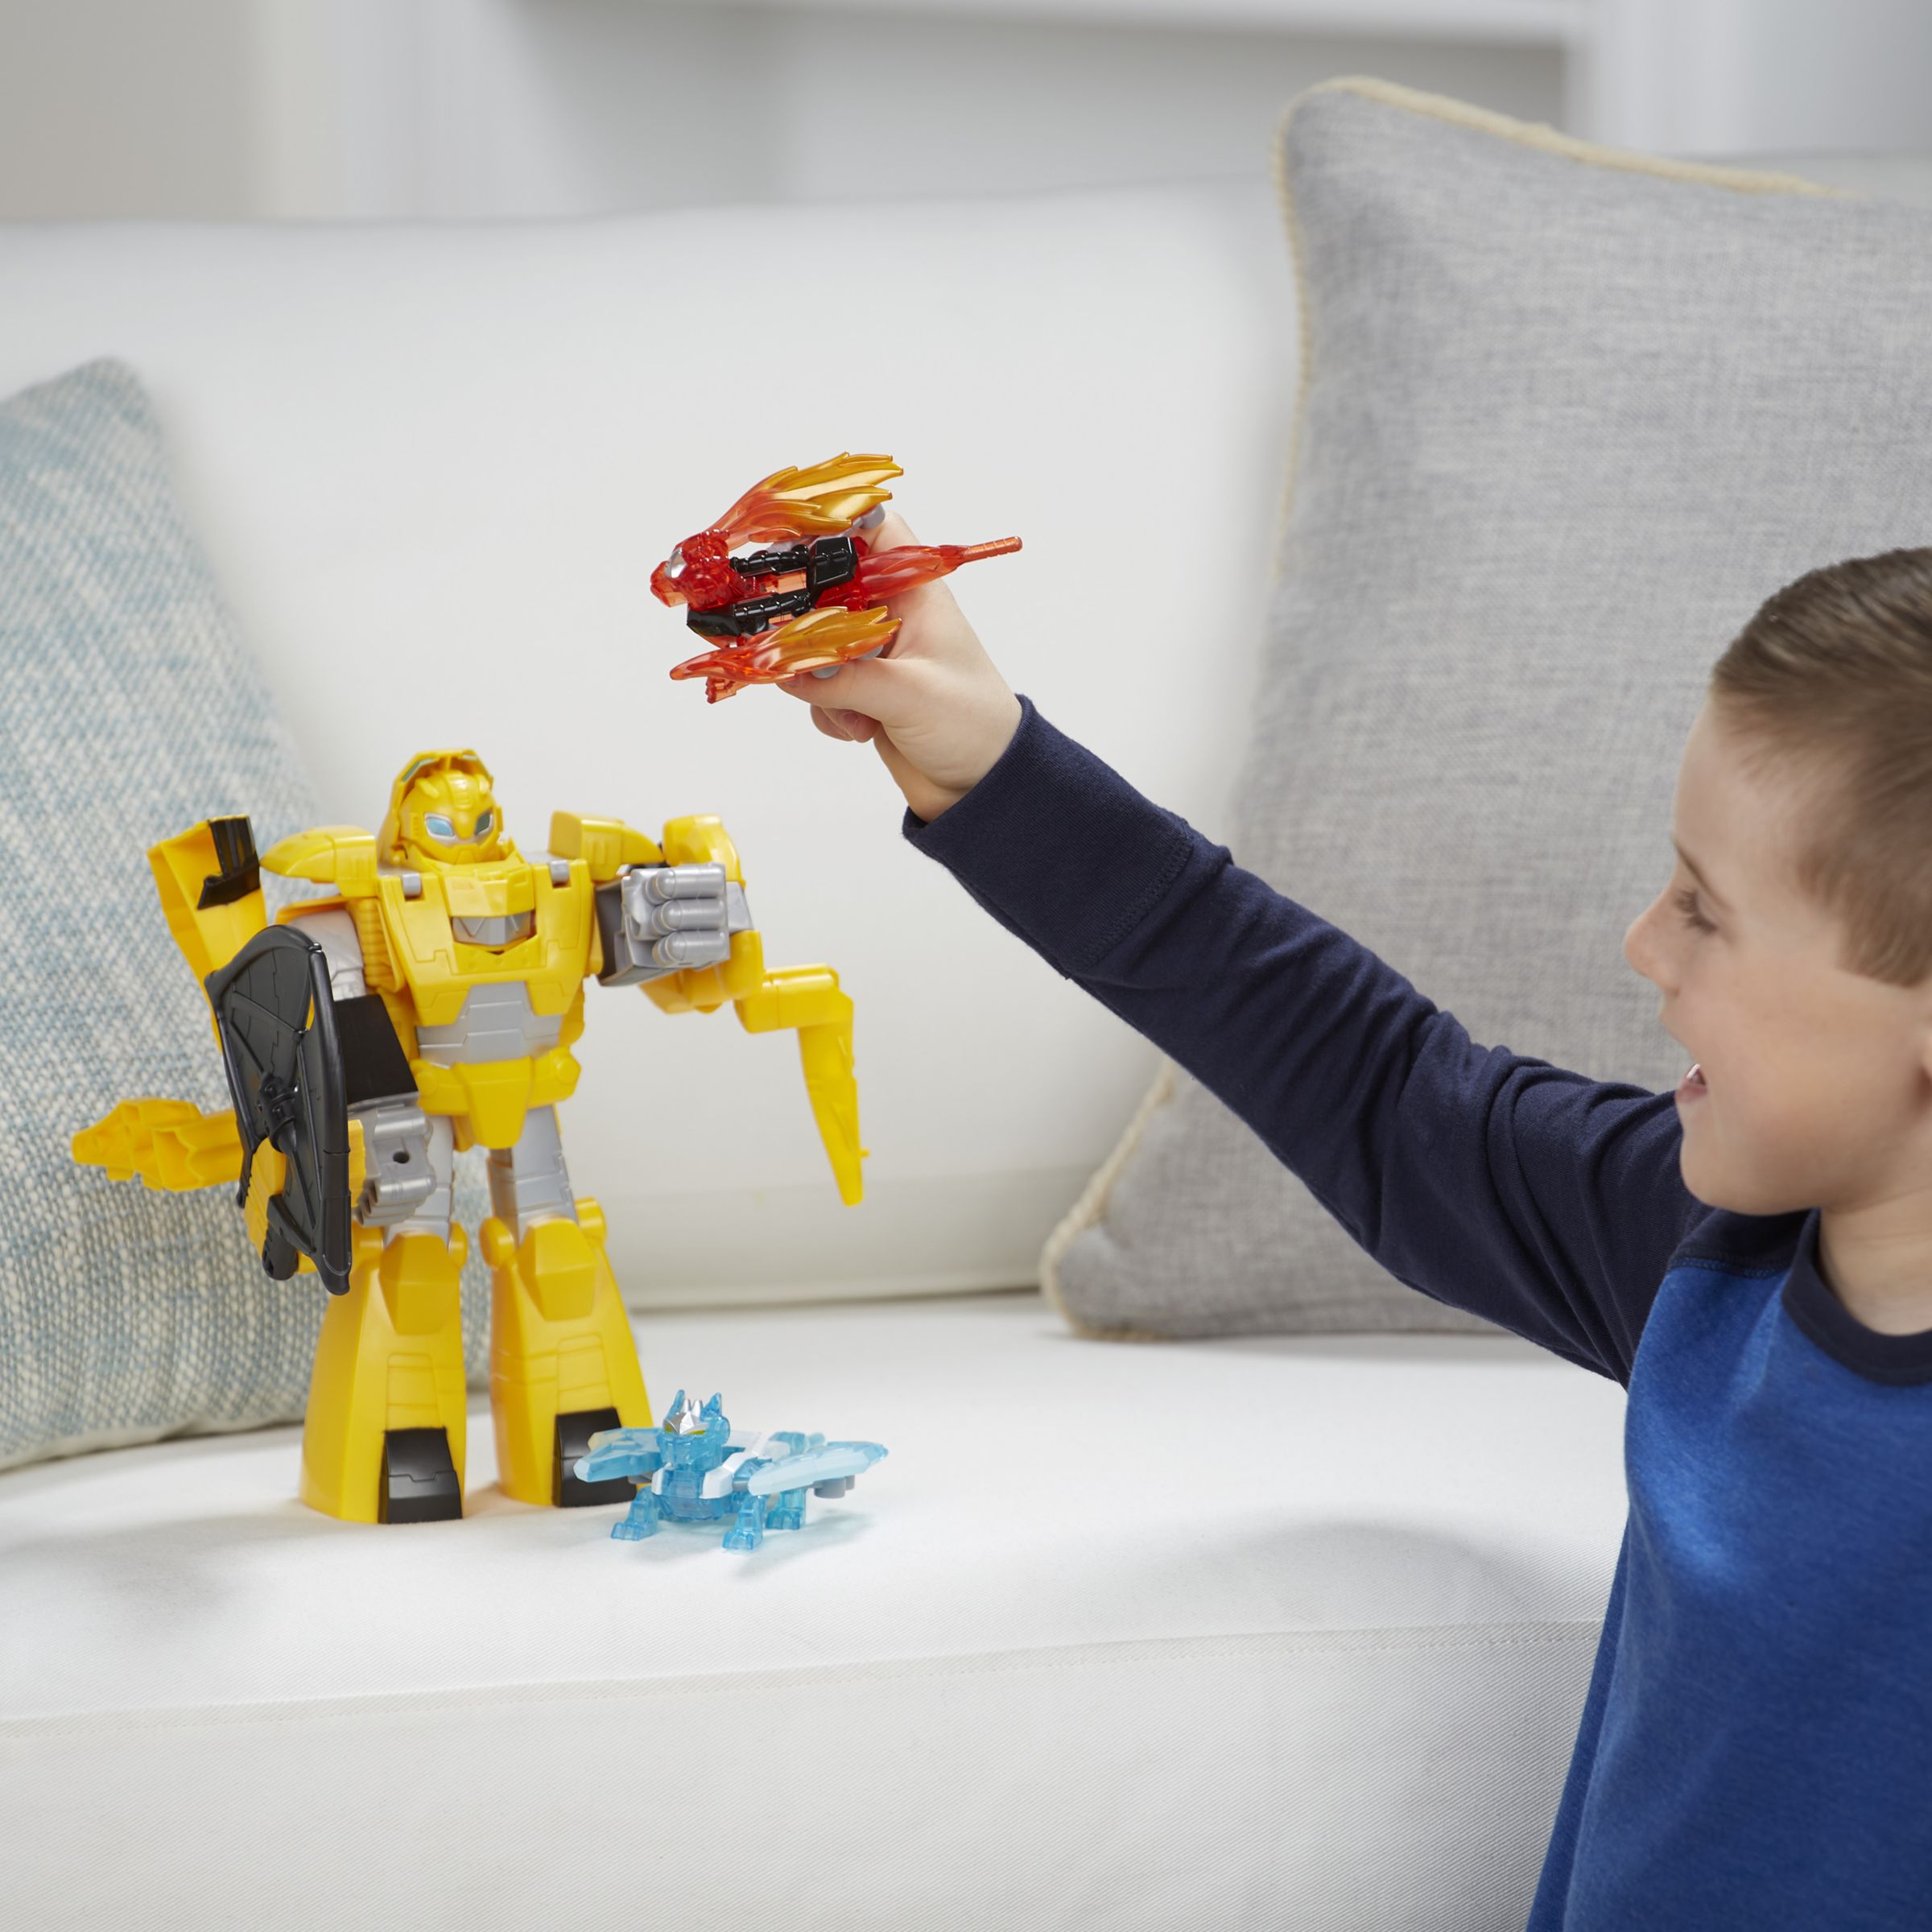 transformers rescue bots knight watch bumblebee